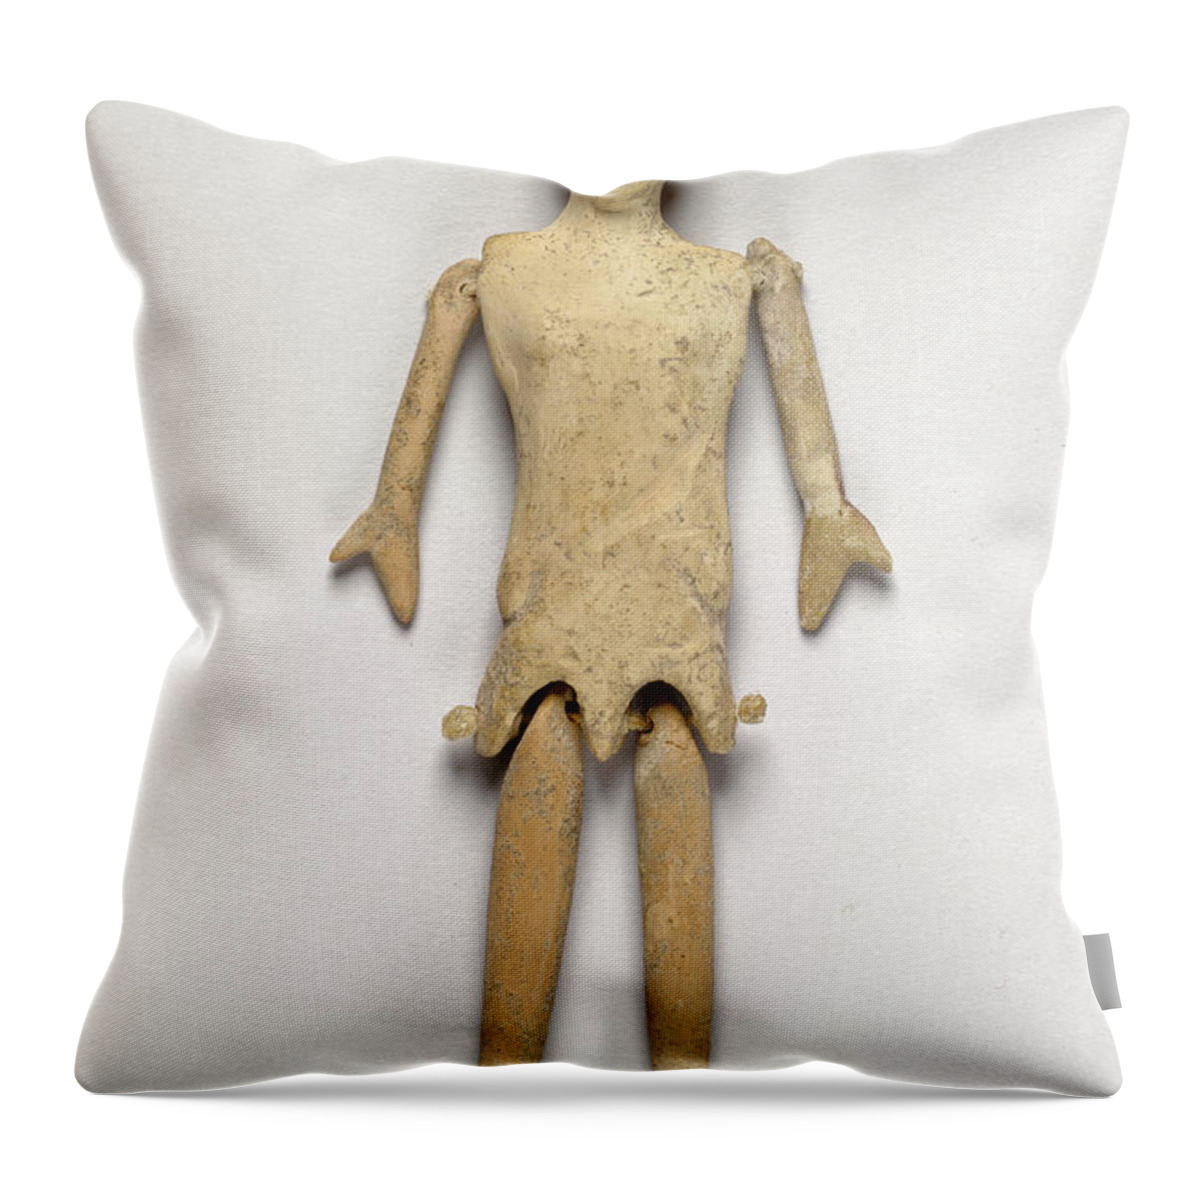 History Throw Pillow featuring the photograph Doll, 5th Century Bc by Getty Research Institute